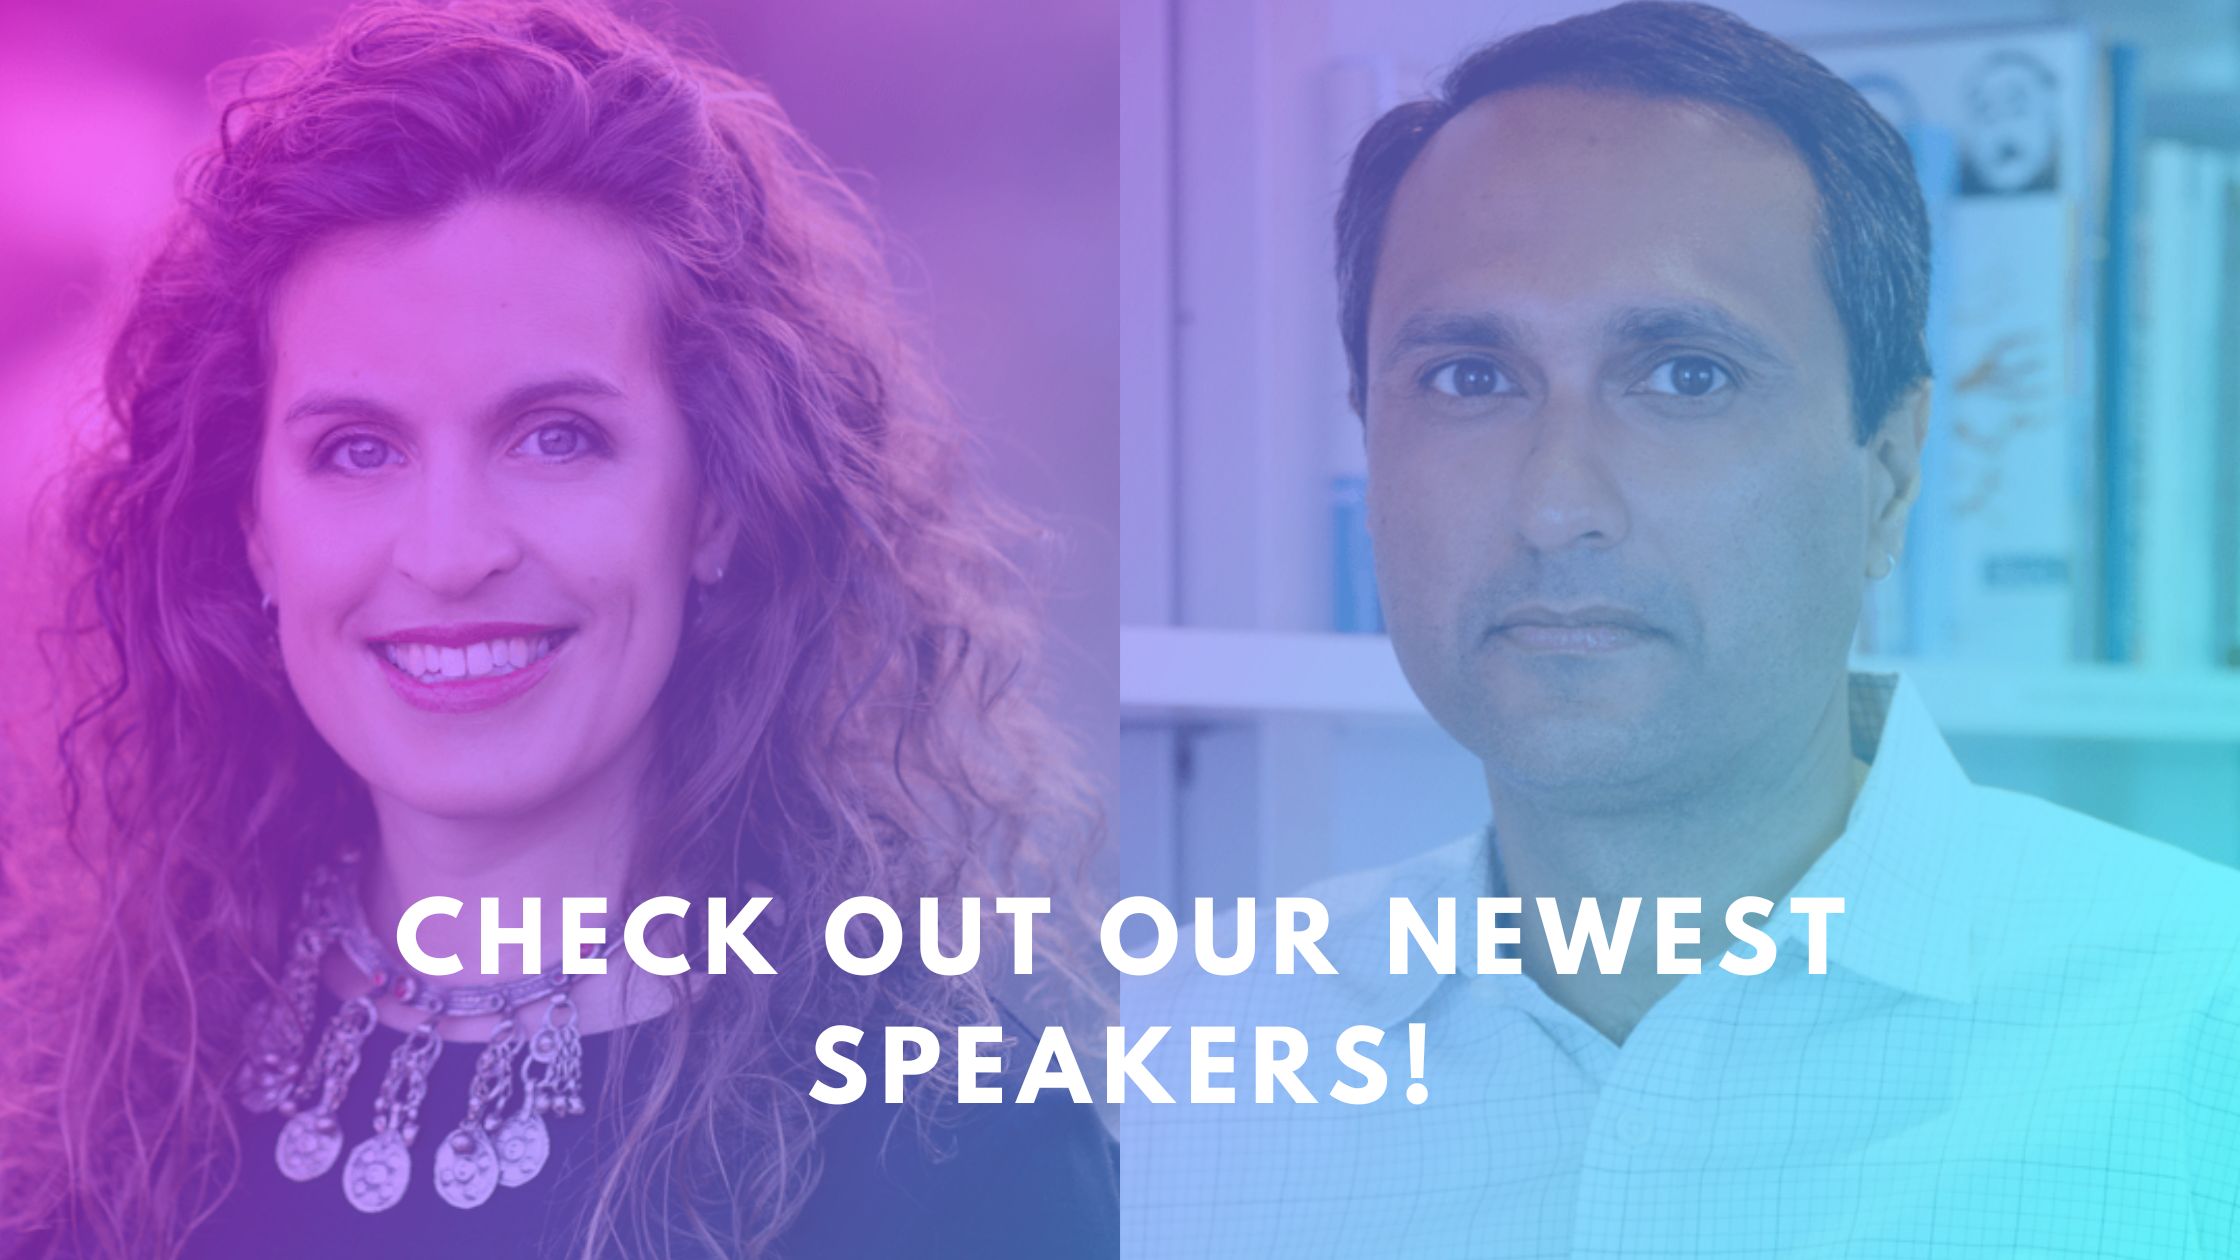 Check out our newest speakers!